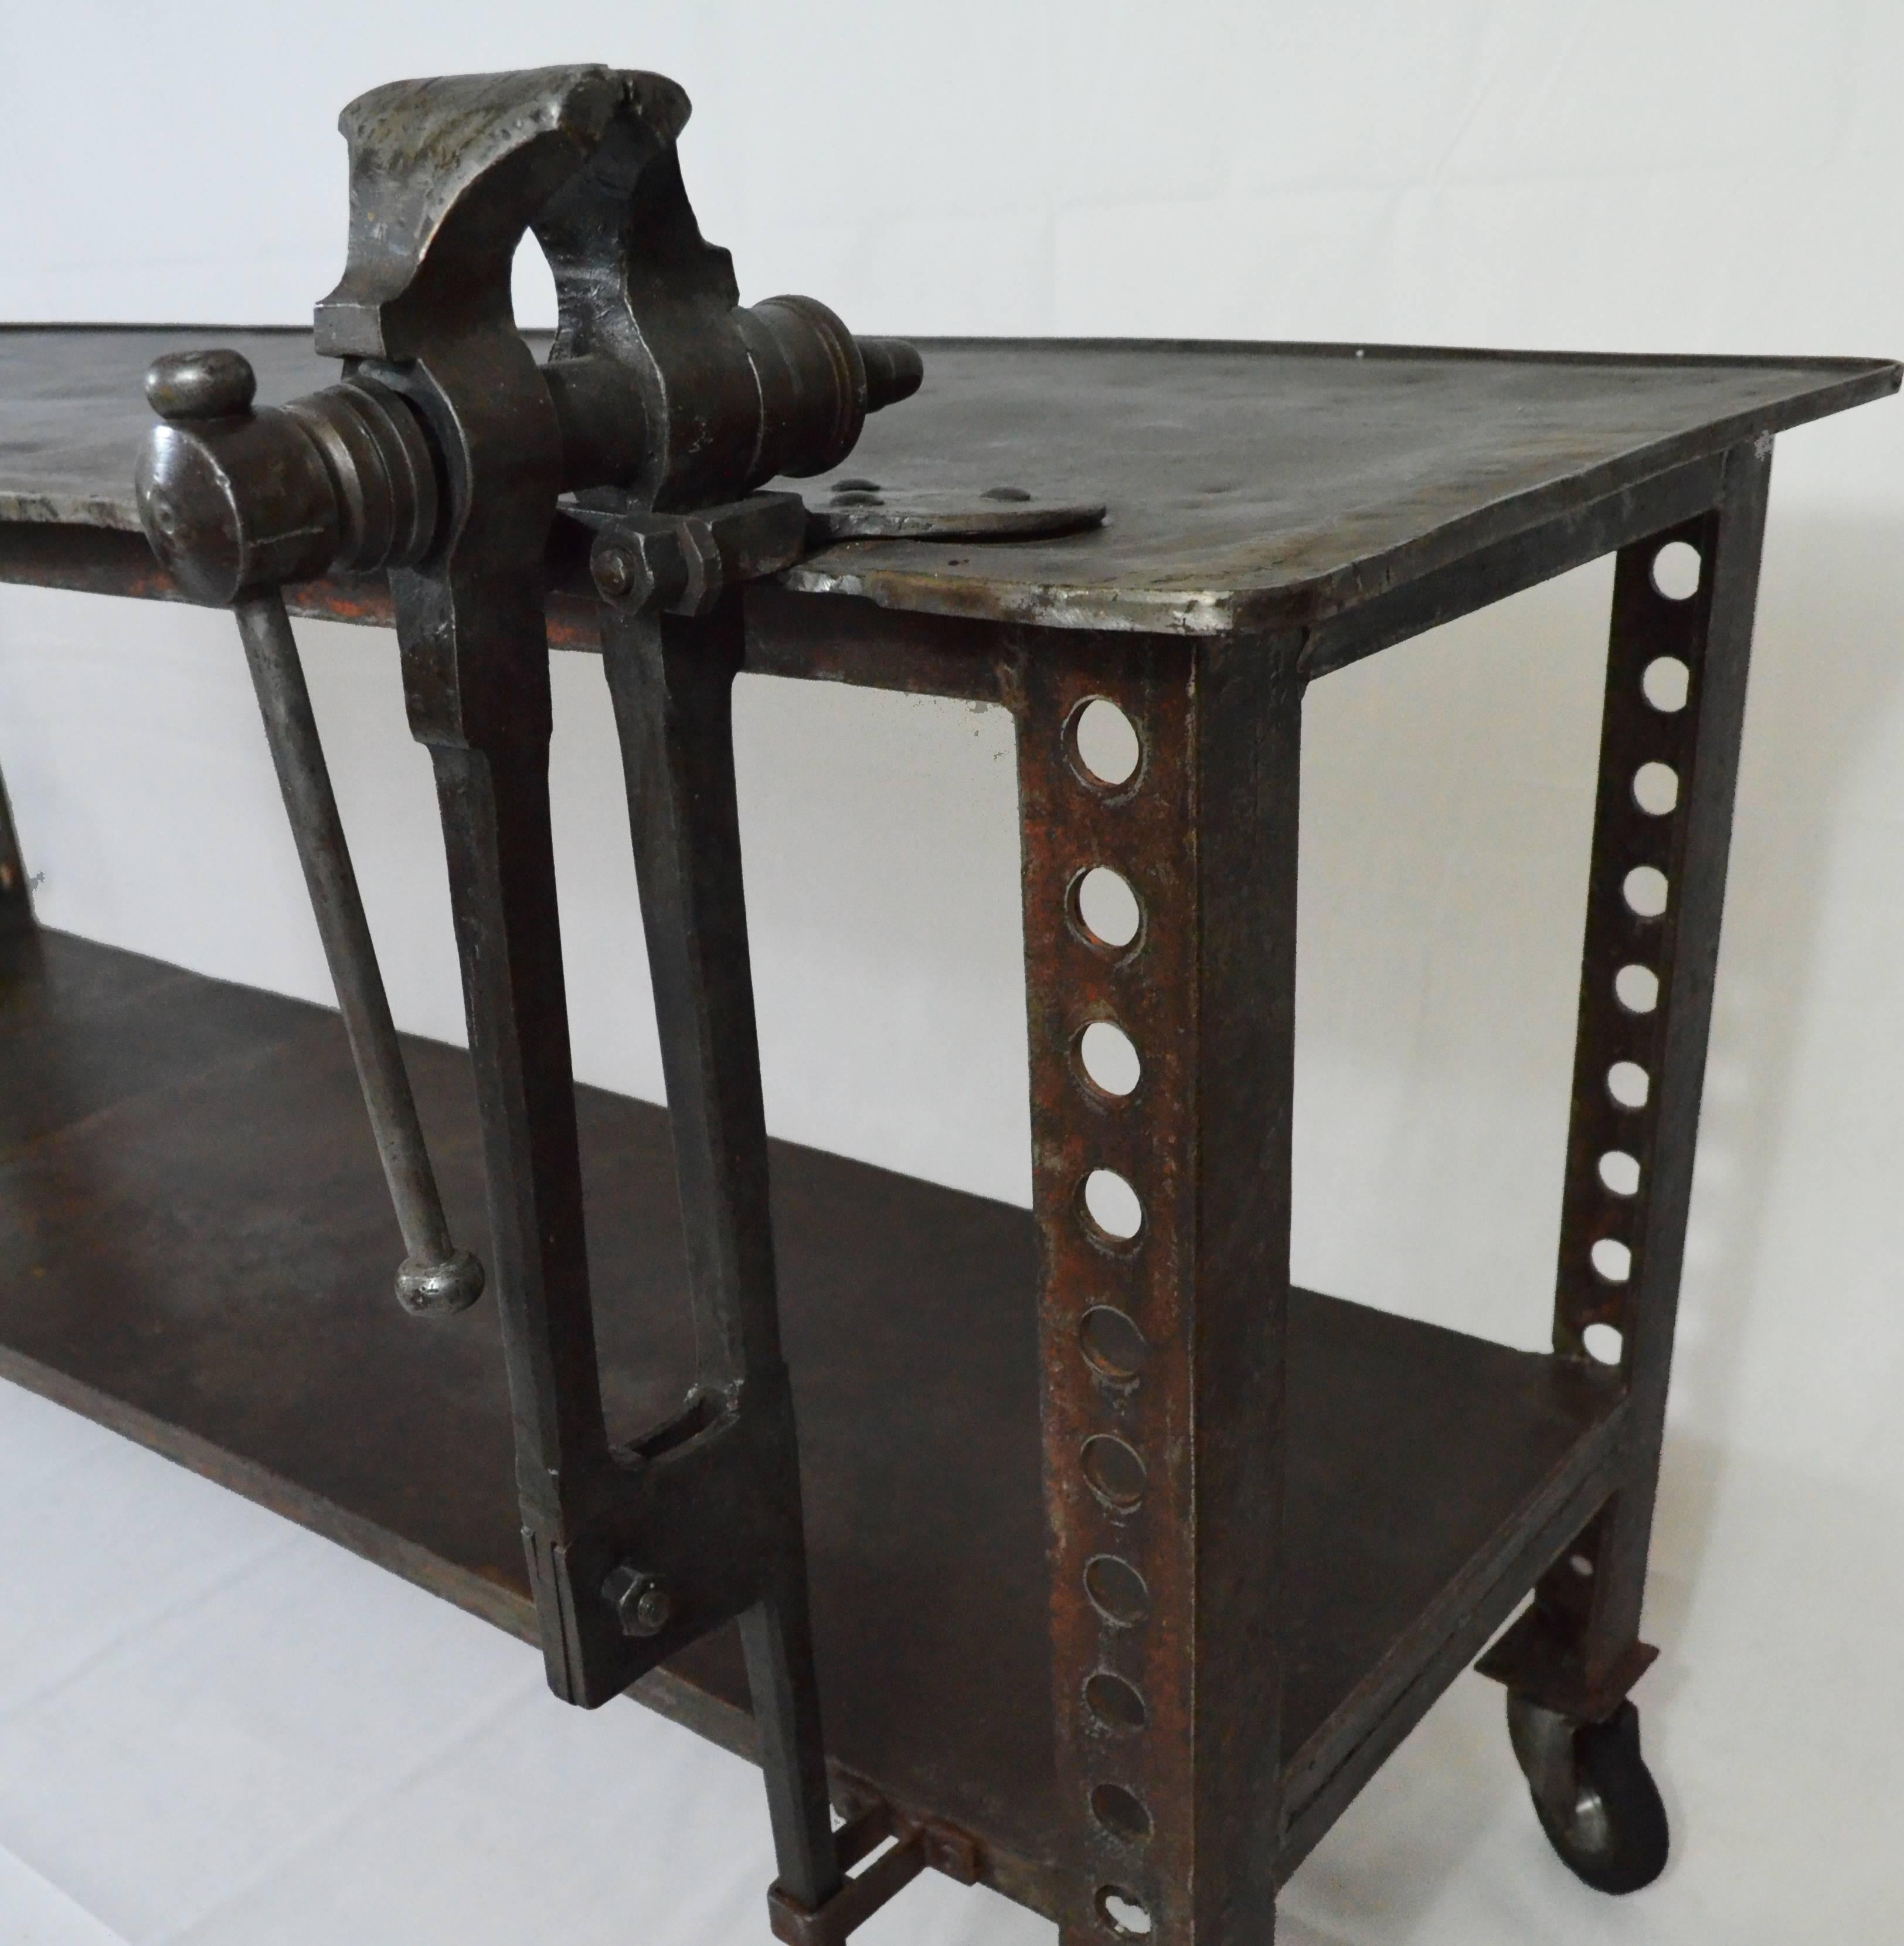 Italian Iron Industrial Workstation, Early 20th Century with Clamp